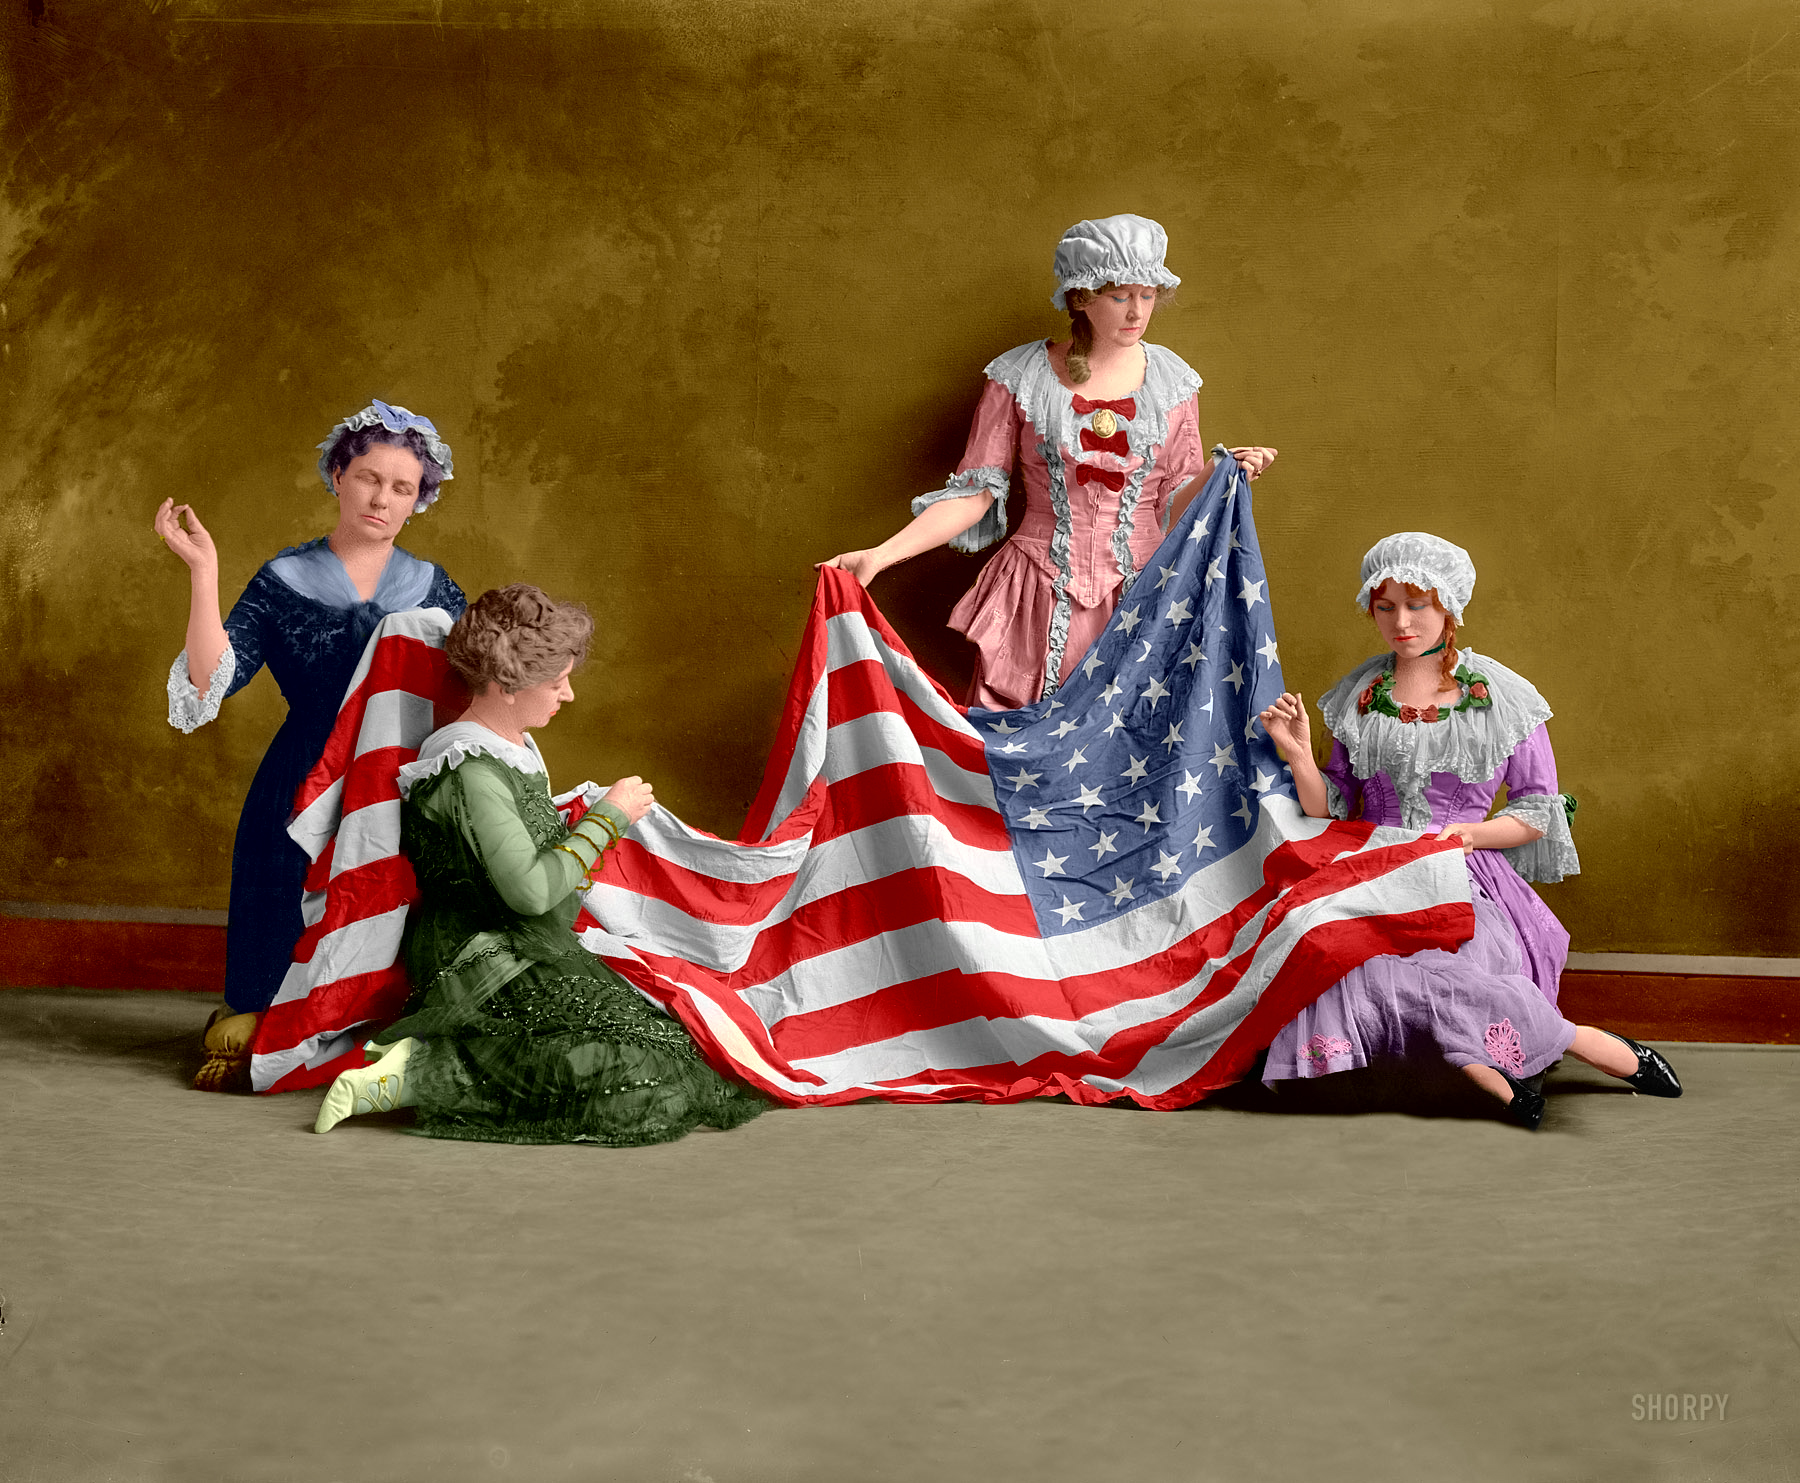 I planned to hold off on uploading any more colorized images for about a week or two, but these ladies and Old Glory just seemed so right for color I couldn't resist. And now was the time to get them colorized and uploaded. View full size.